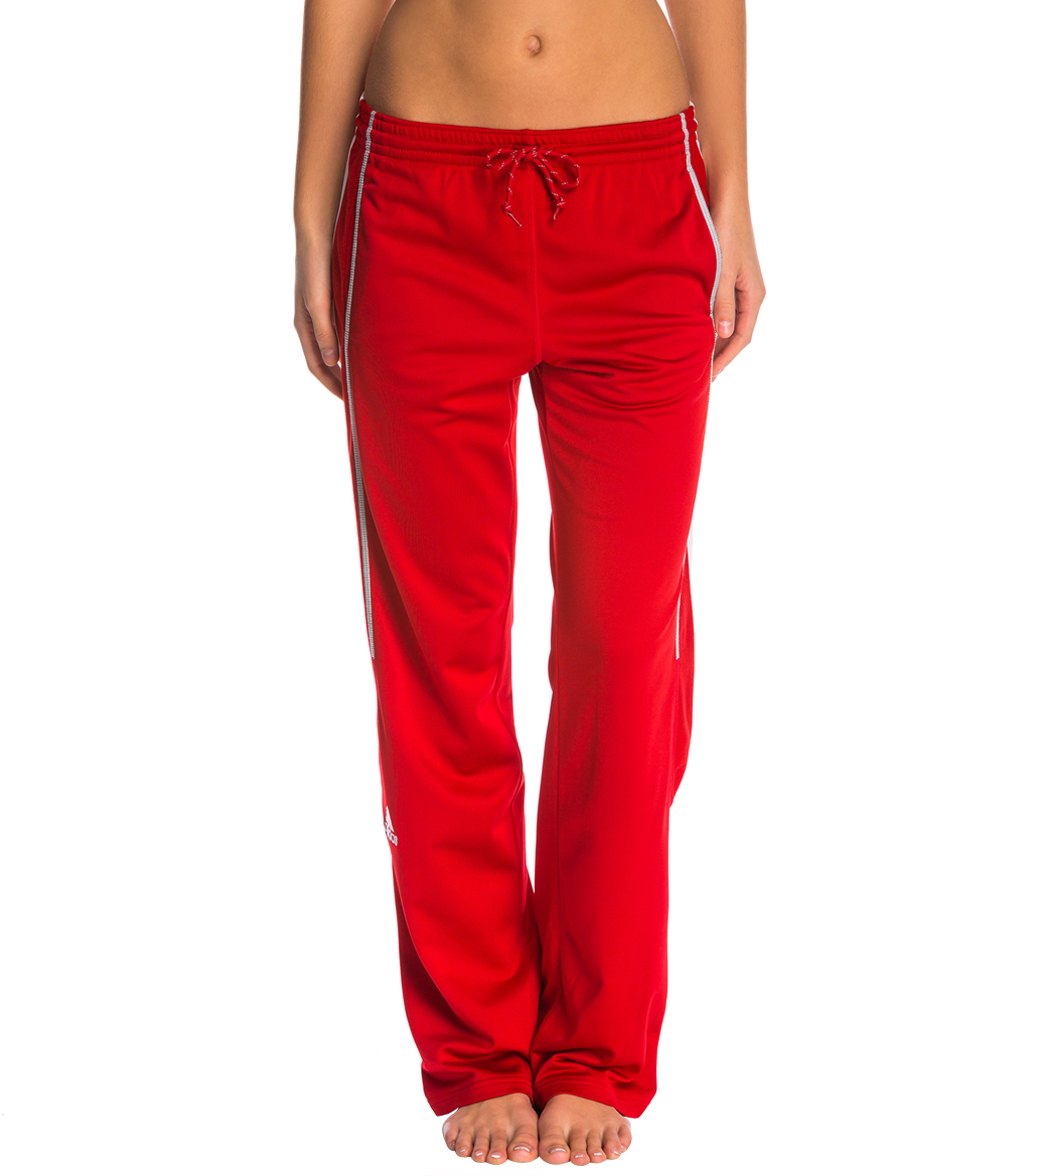 Adidas Women's Utility Warm Up Pants - Red X-Small Polyester - Swimoutlet.com